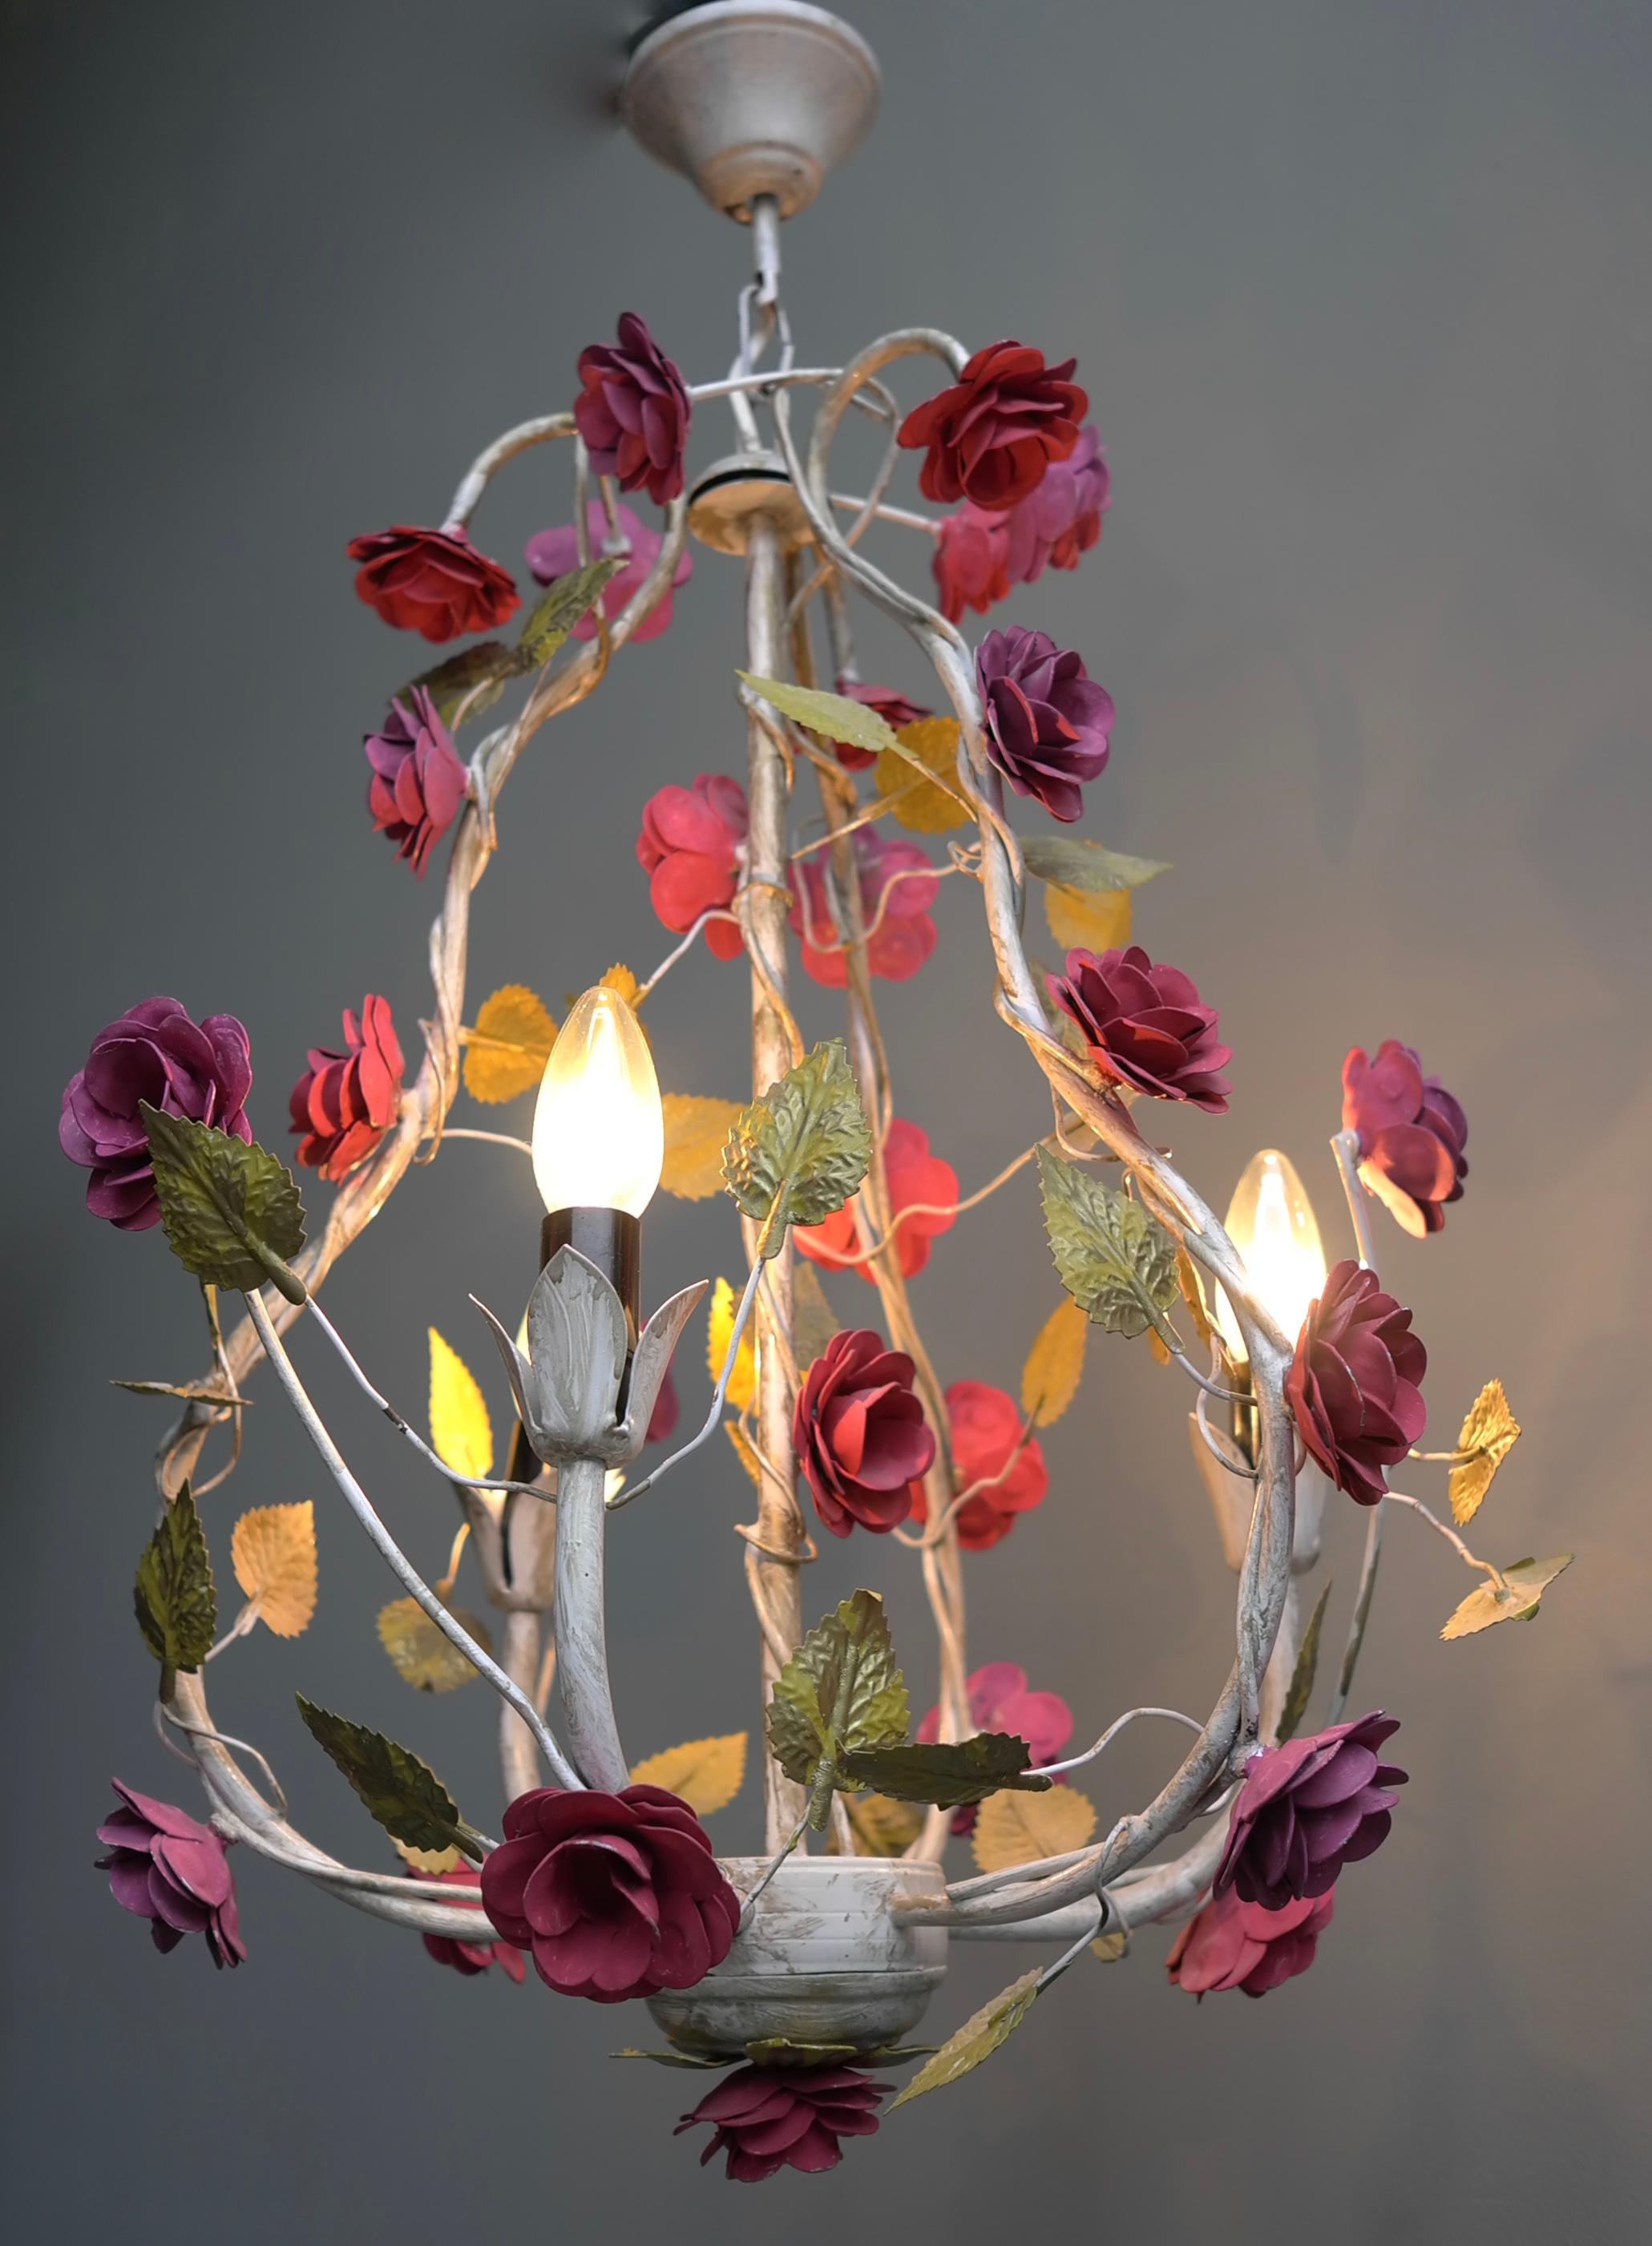 Hand-Painted Metal Colorful Hand Painted Romantic Roses Bouquet Pendant Lamp, Italy, 1960s For Sale